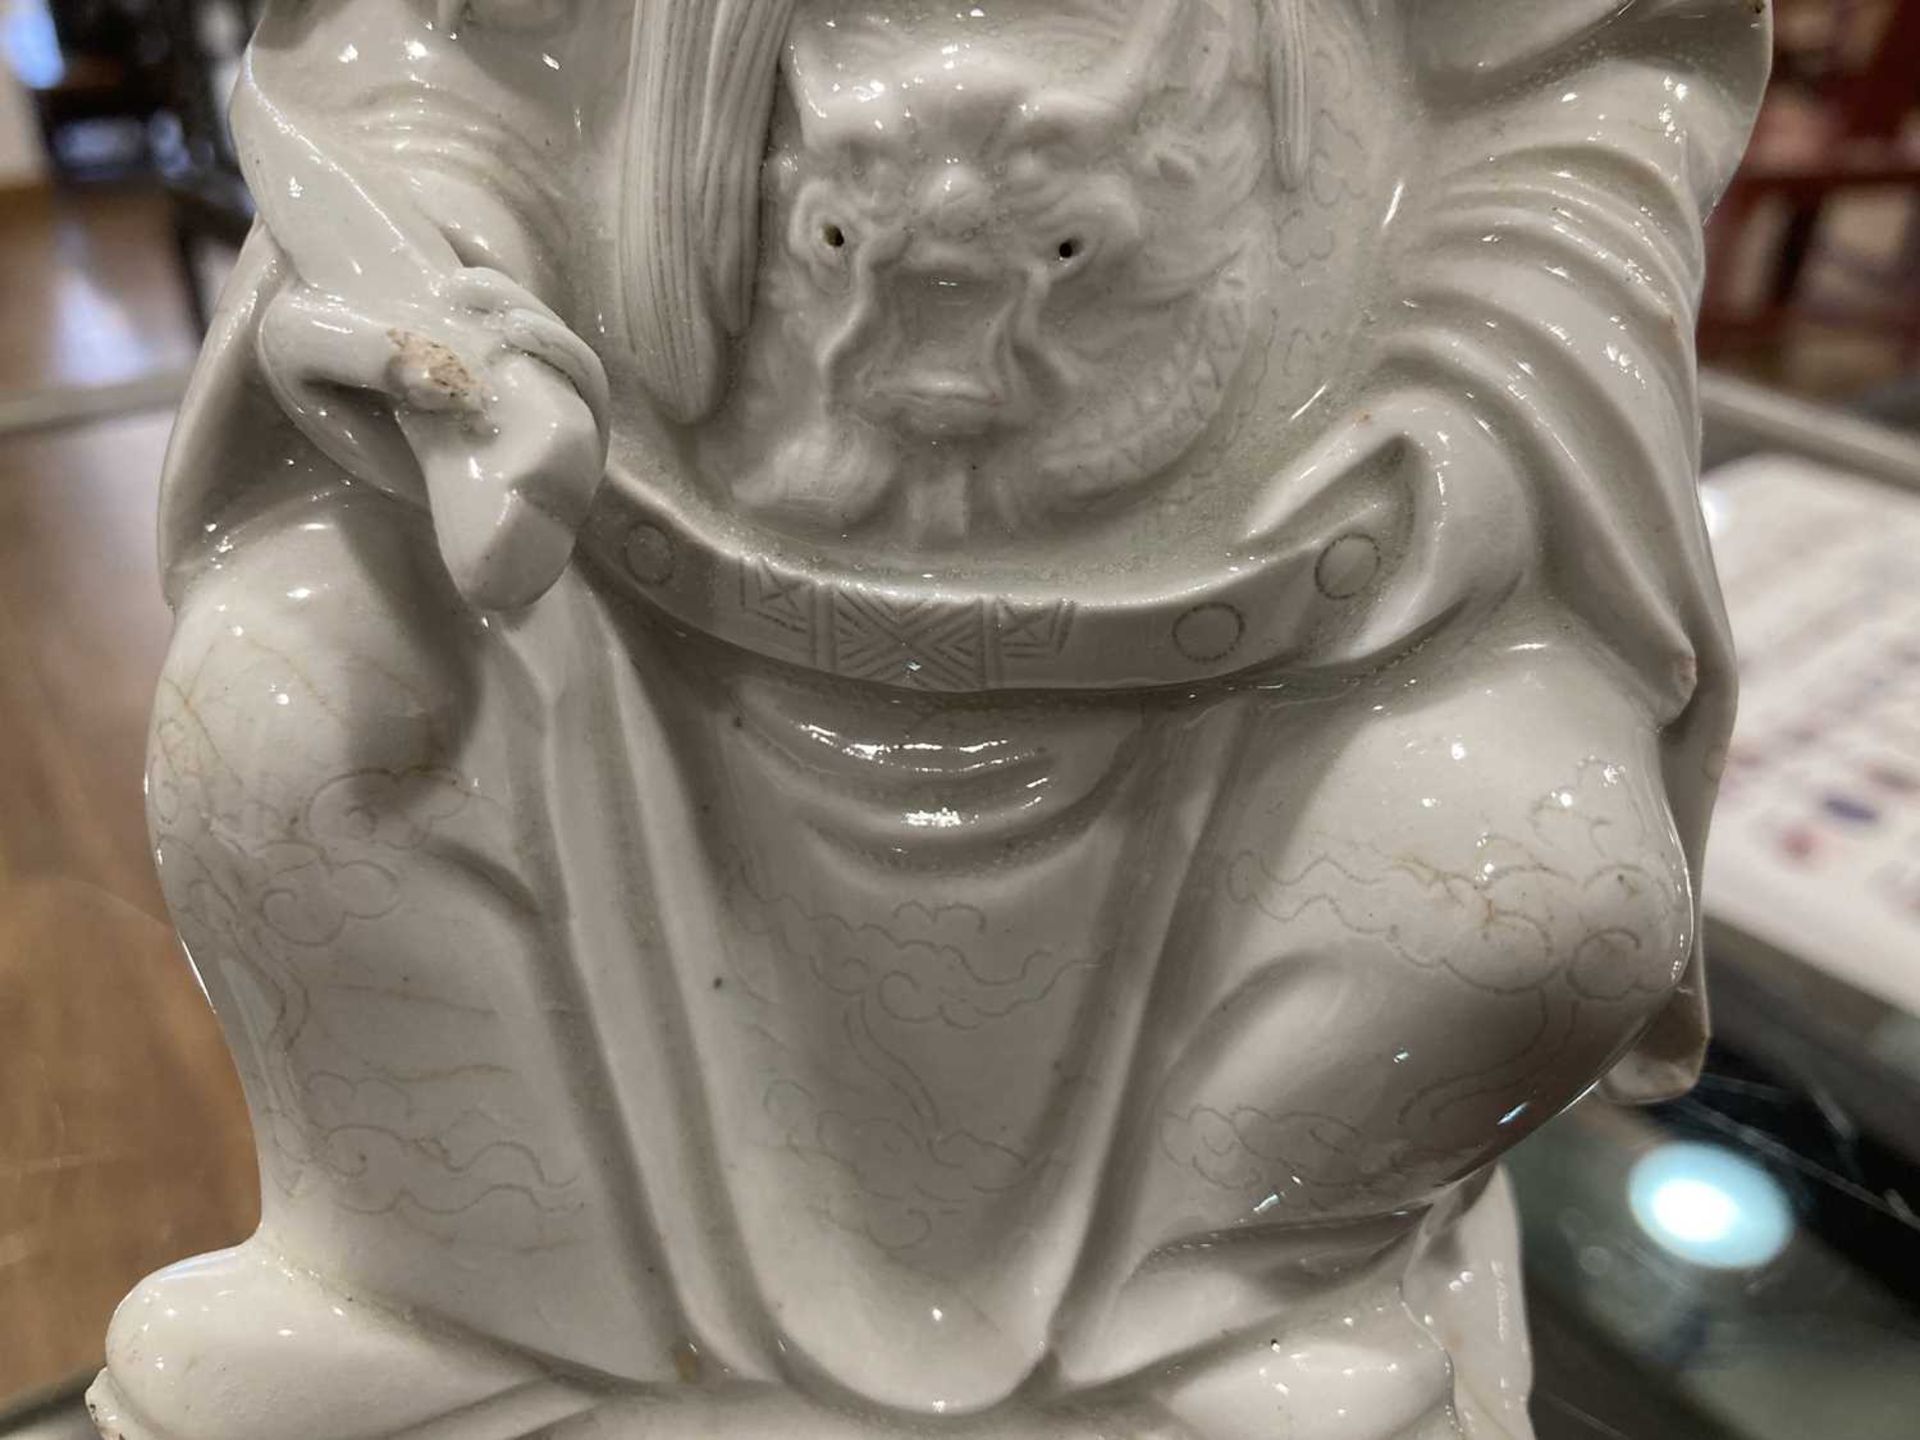 A Chinese blanc de chine figure, possibly Dong Fangshuo, holding a walking stick on a swirl design - Image 15 of 22